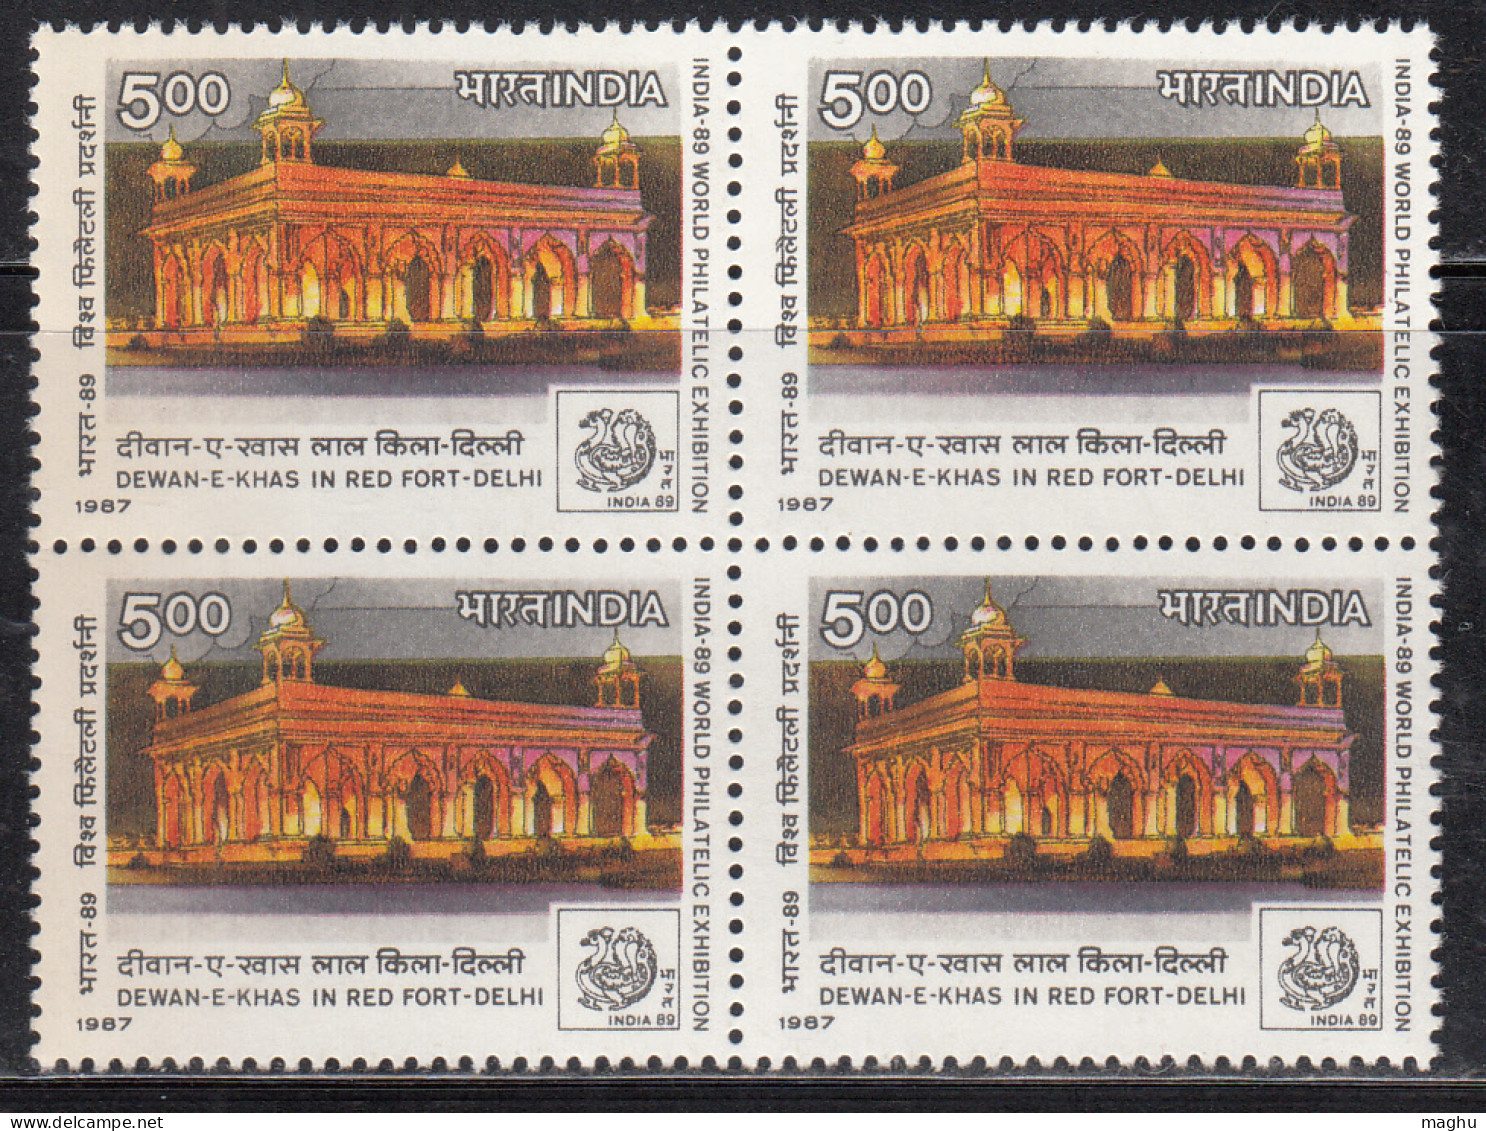 Block Of 4, India MNH 1987, India 89 Stamp Exhibition, Monuments, Monument Dewan E Khas, Red Fort, - Blocs-feuillets